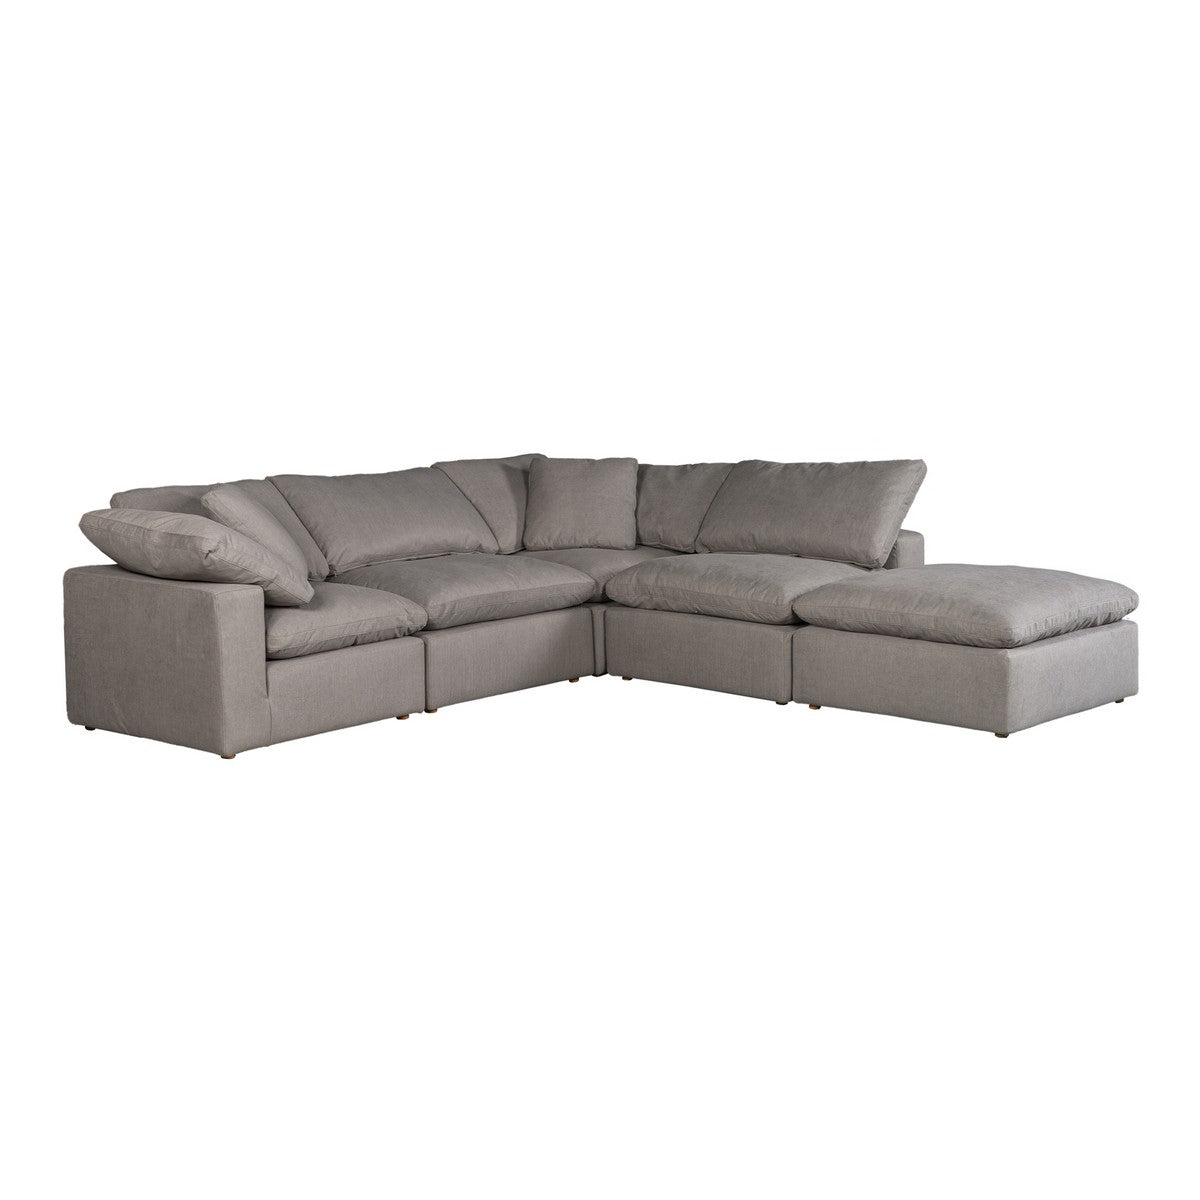 Moe's Home Collection Clay Dream Modular Sectional Livesmart Fabric Light Grey - YJ-1011-29